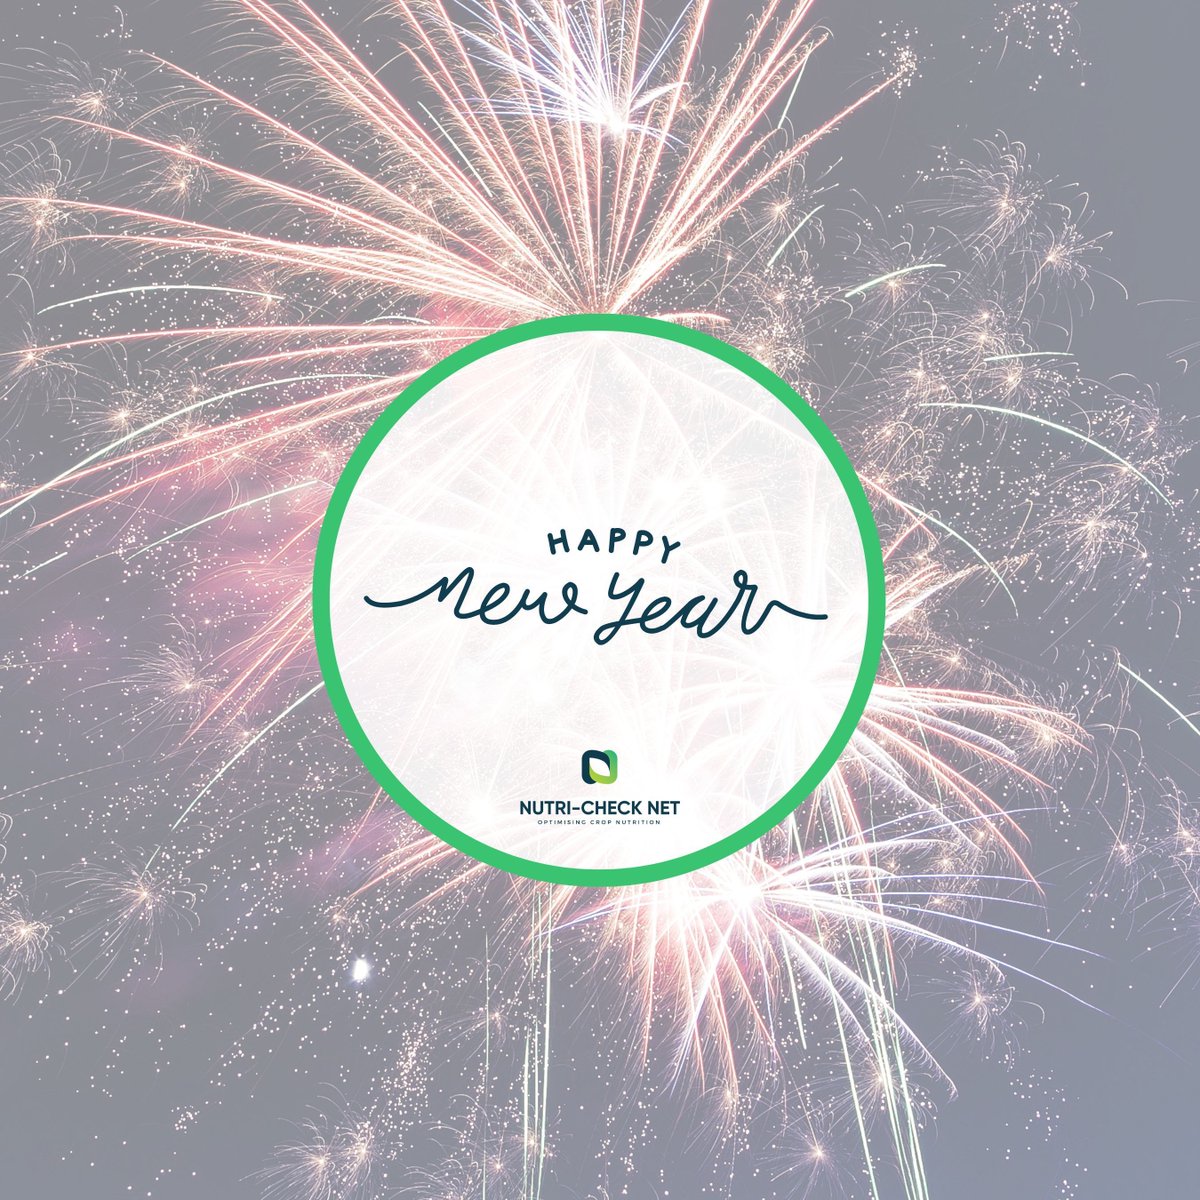 🎉 Cheers to the New Year!

🌟 The NUTRI-CHECK NET consortium wishes everyone a fantastic New Year's Eve filled with joy and celebration.

#HappyNewYear #PrecisionNutrition